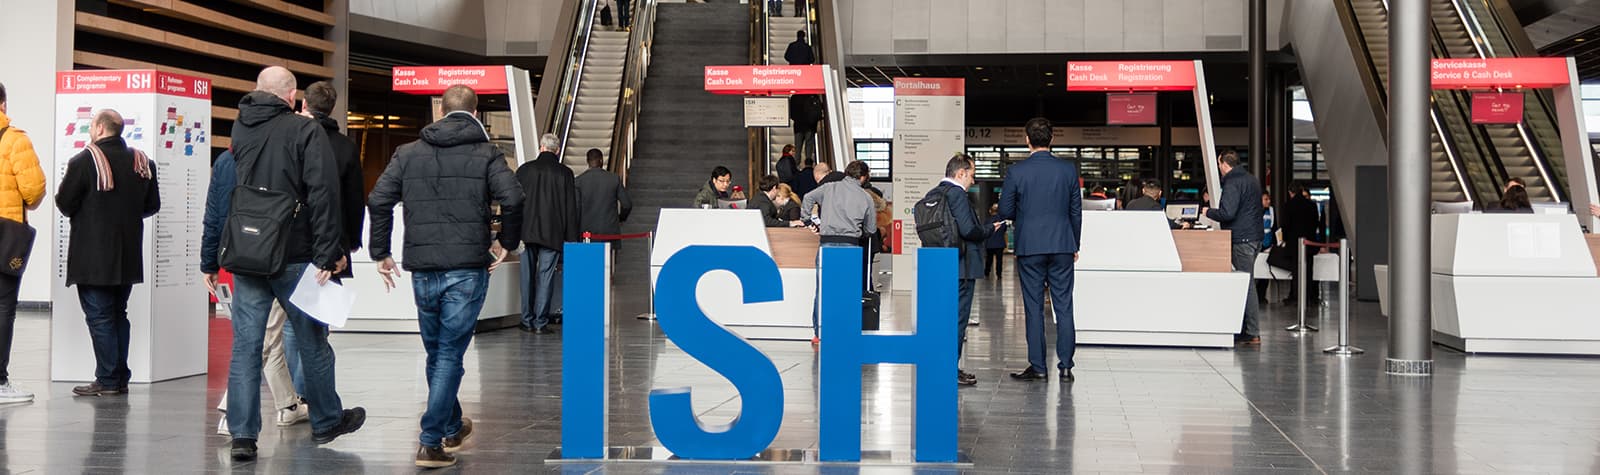 We are there – Welcome to the ISH from March 13 to 17, 2023 in Frankfurt am Main.